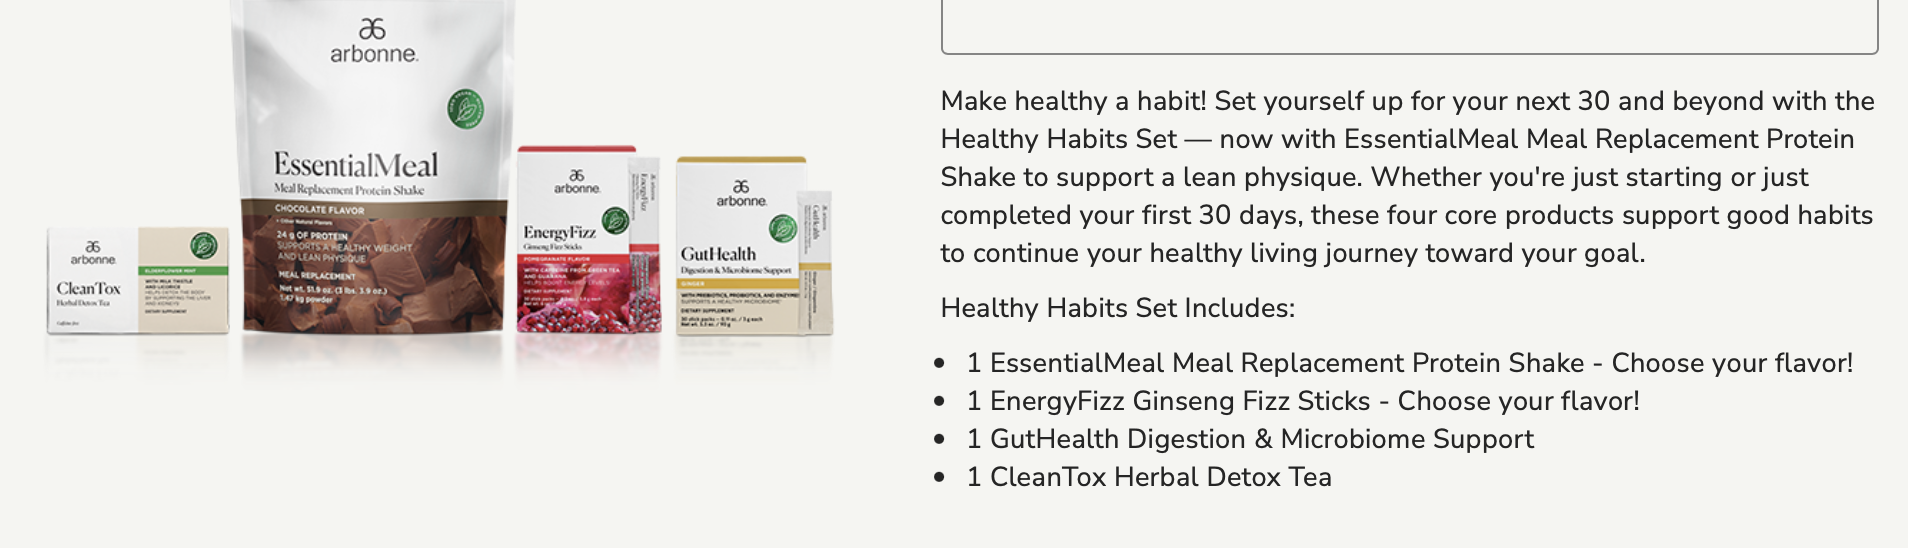 Healthy Habits Set with EssentialMeal
